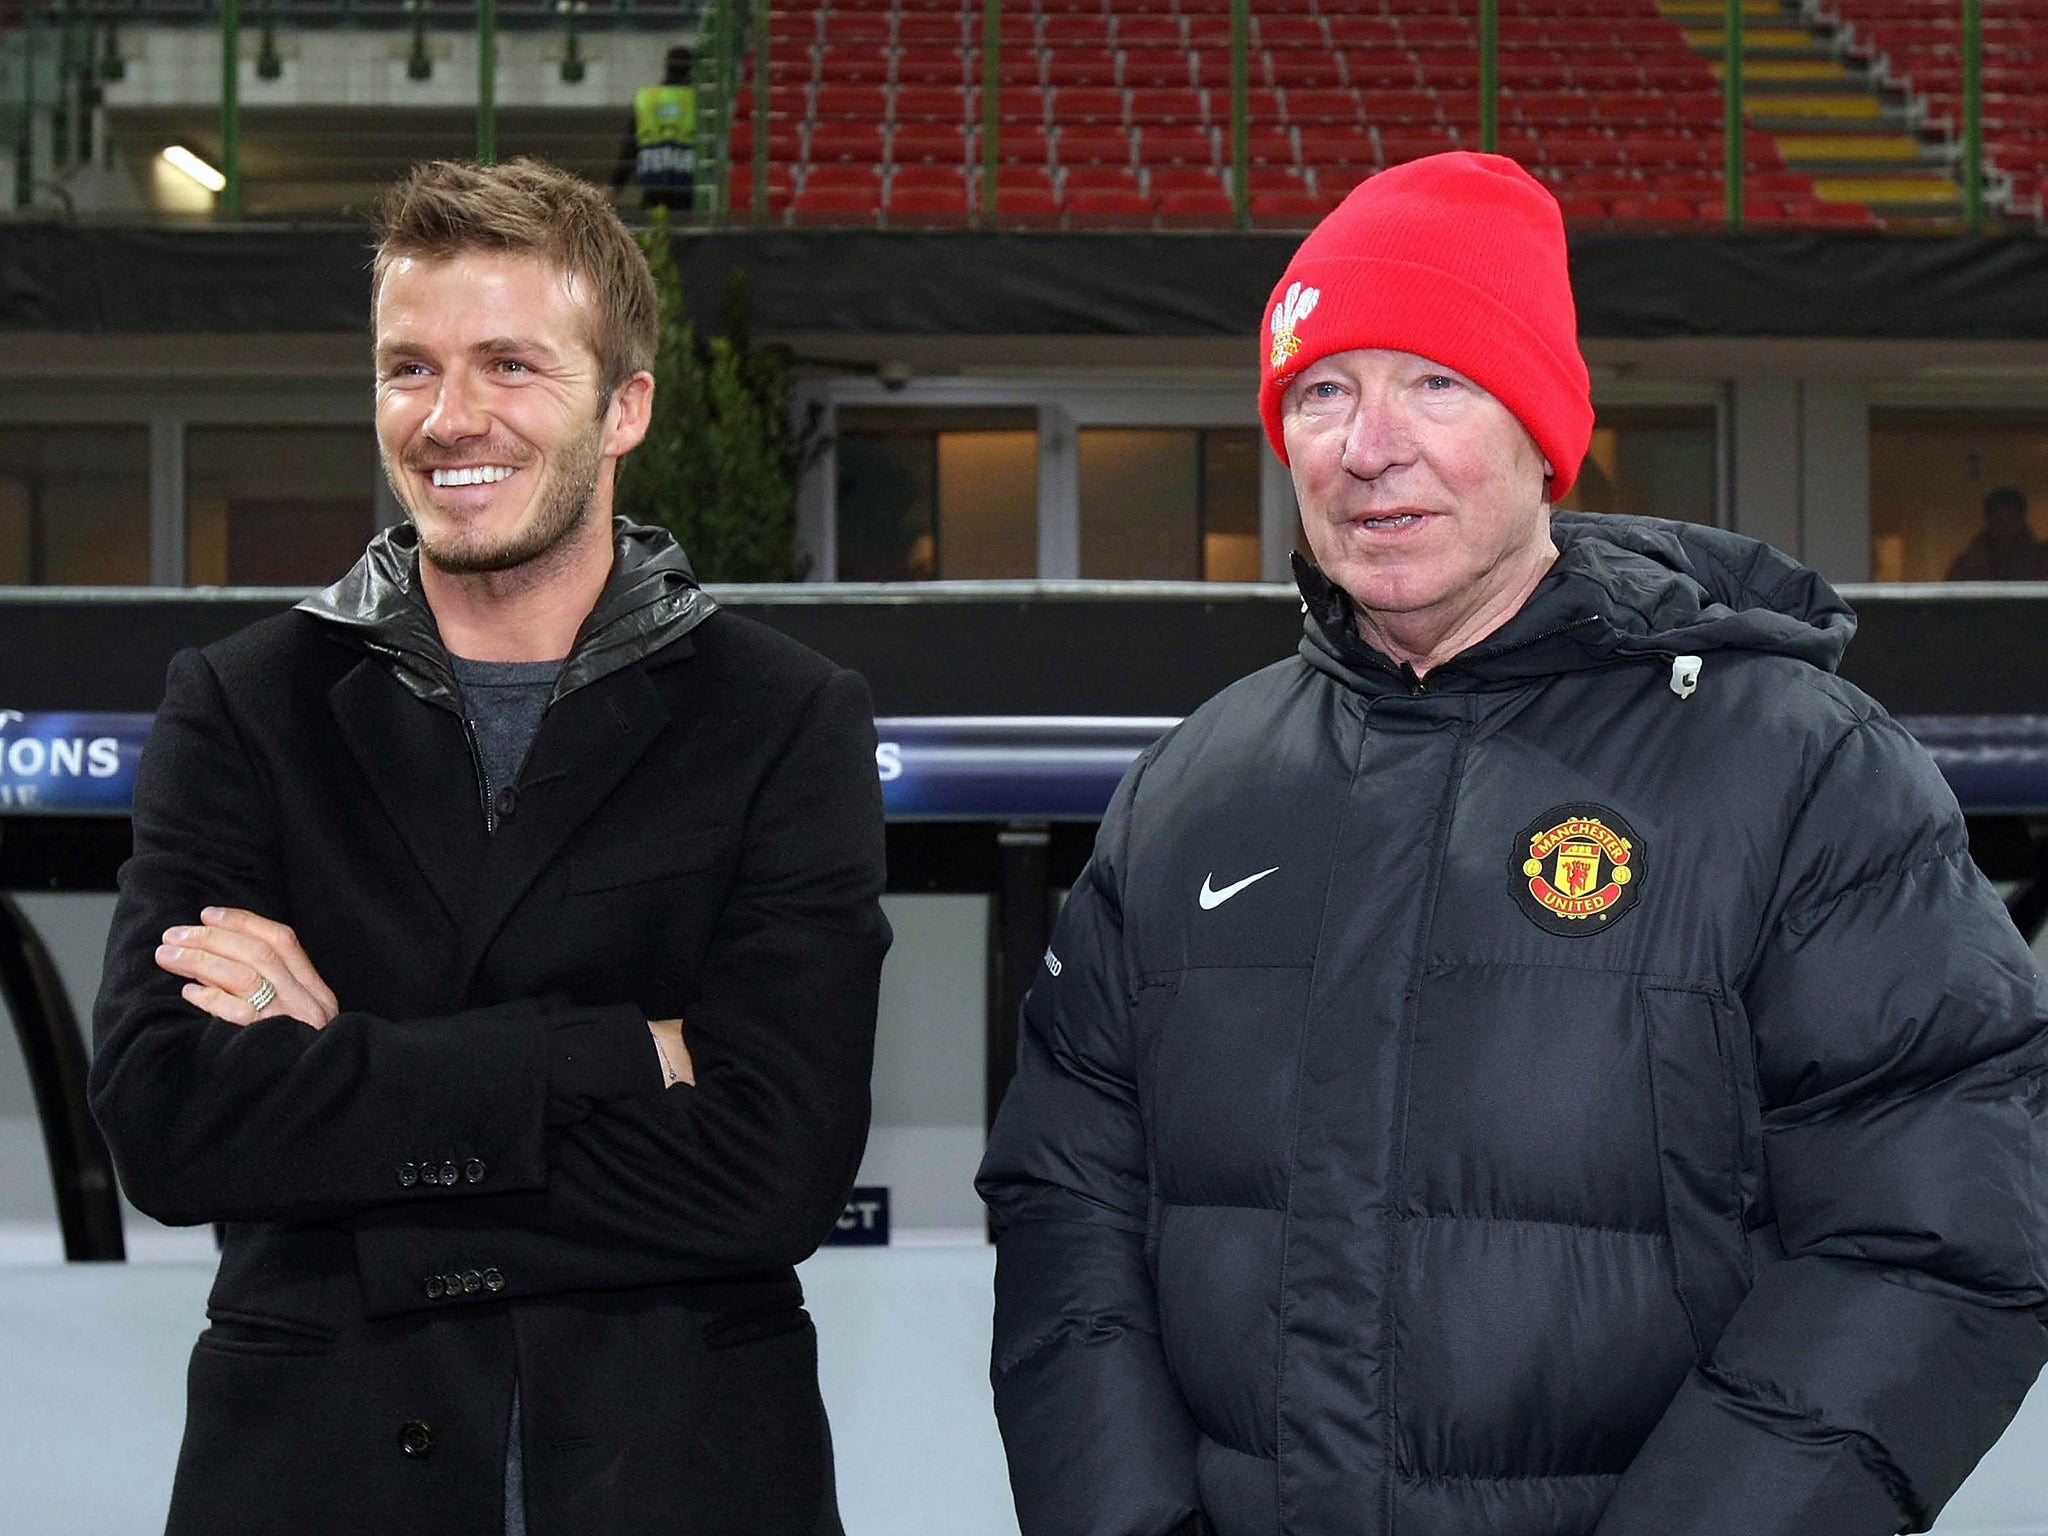 Sir Alex Ferguson and David Beckham meet ahead of Manchester United's Champions League clash with Inter Milan in 2009